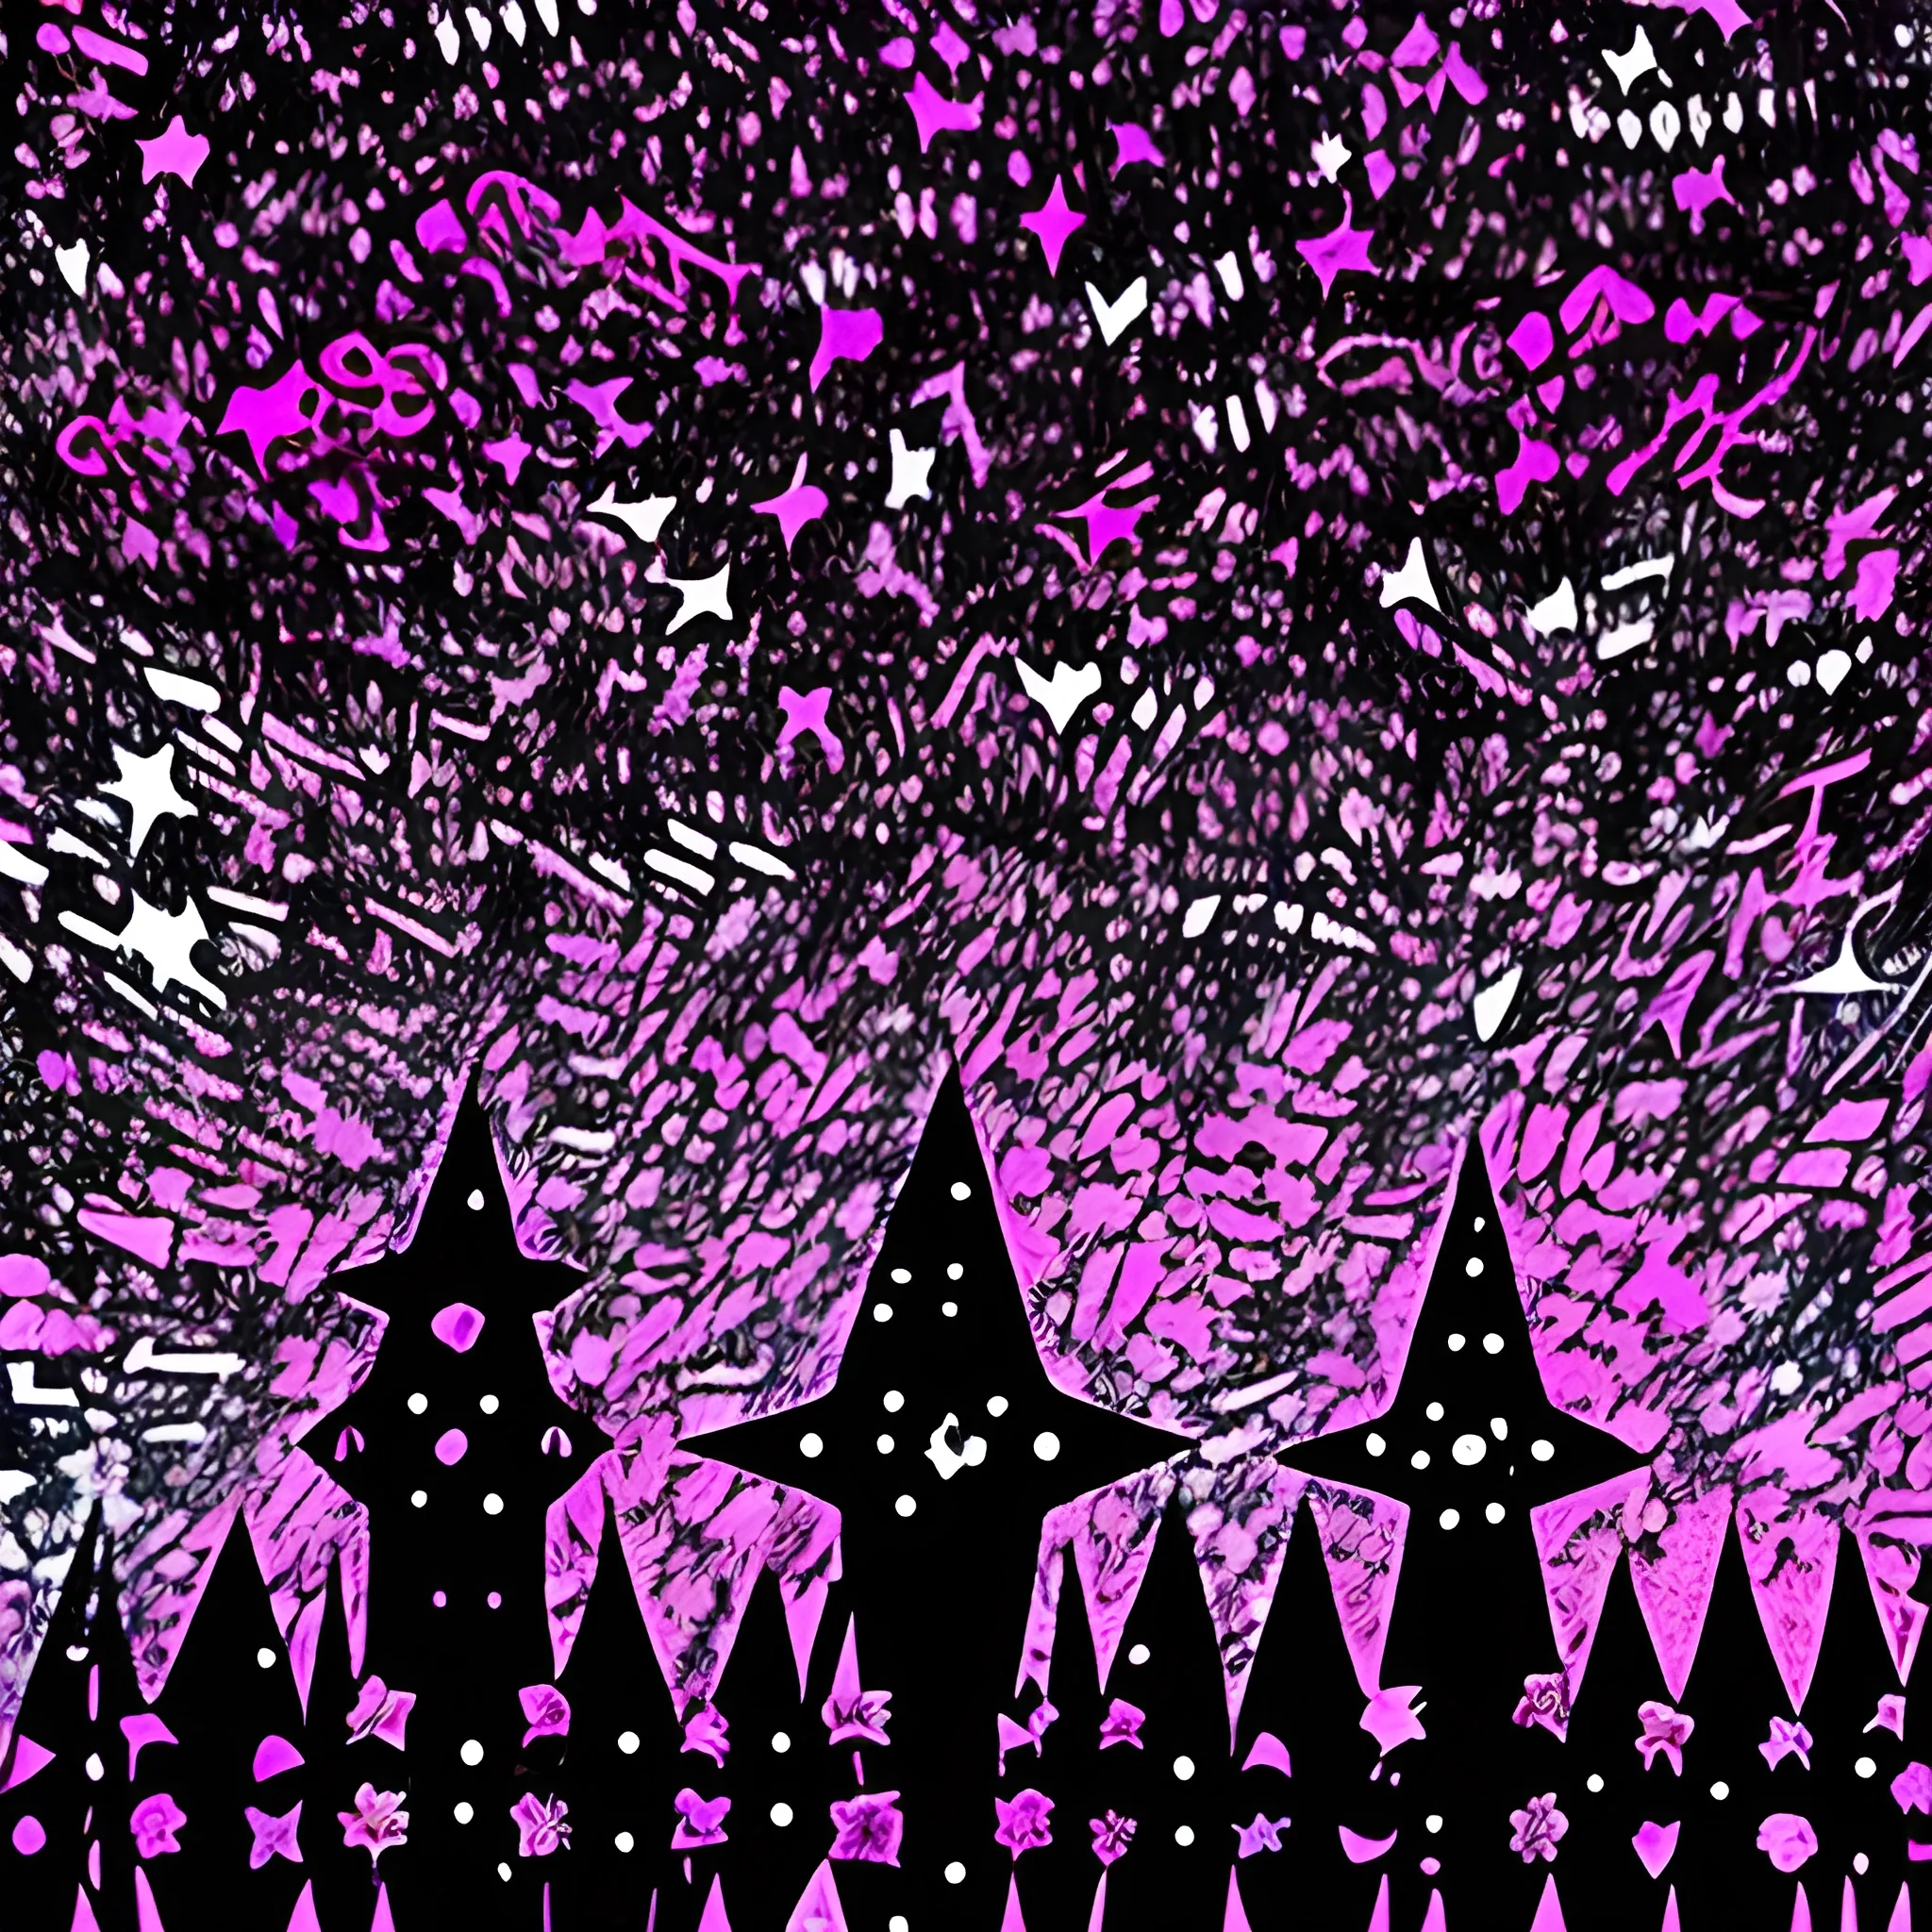 the night starry sky, Trippy, Cartoon. Pink and black colors